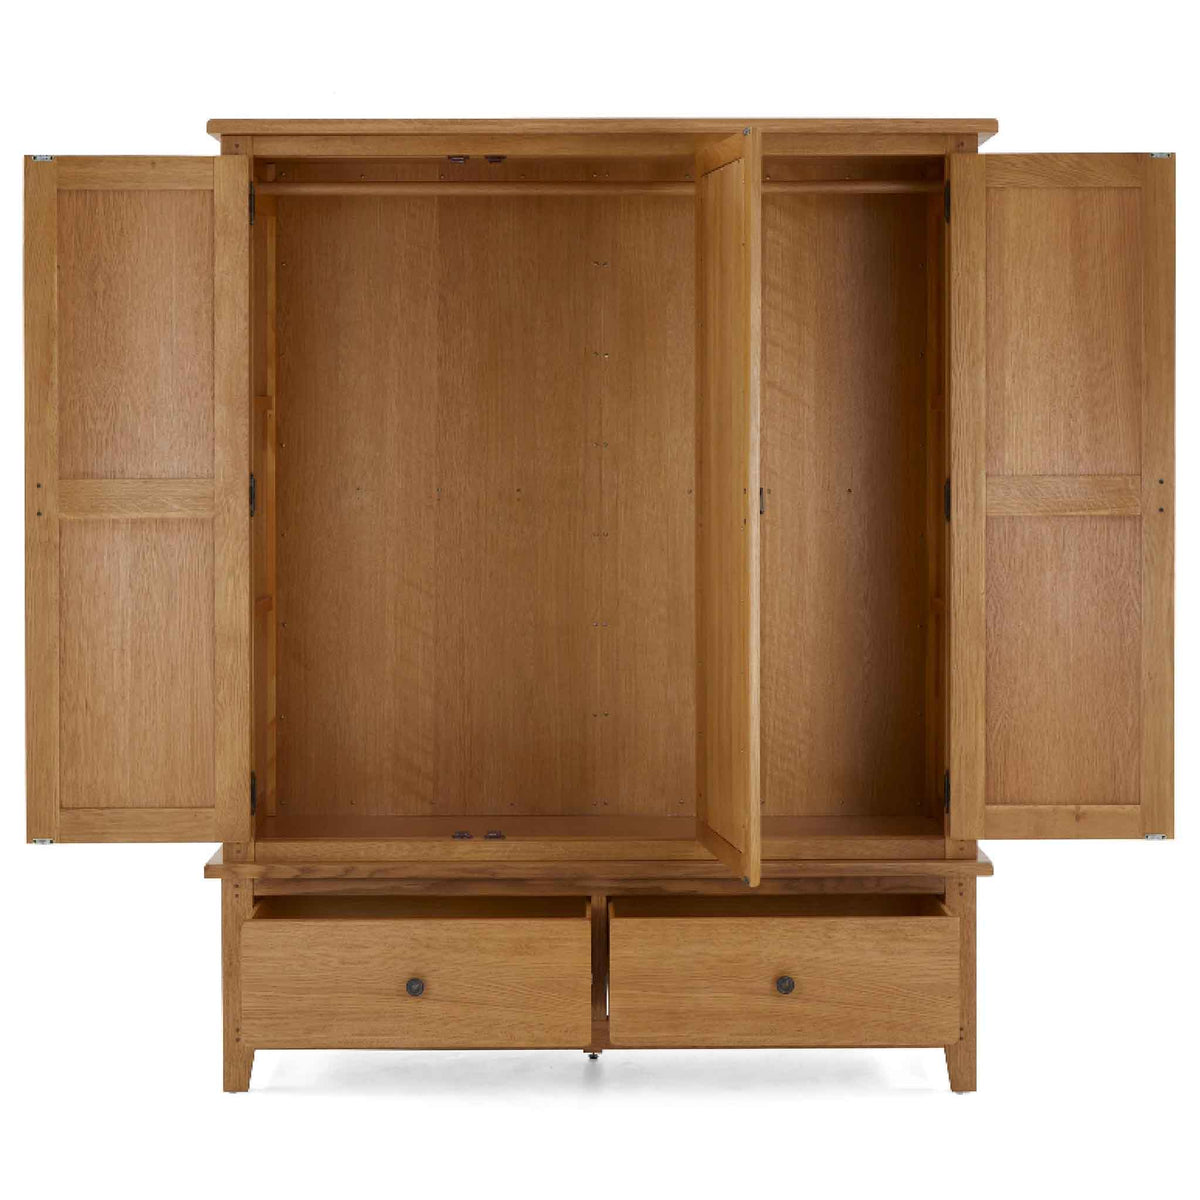 Broadway Oak Triple Wardrobe - Front view with wardrobe doors and drawers open